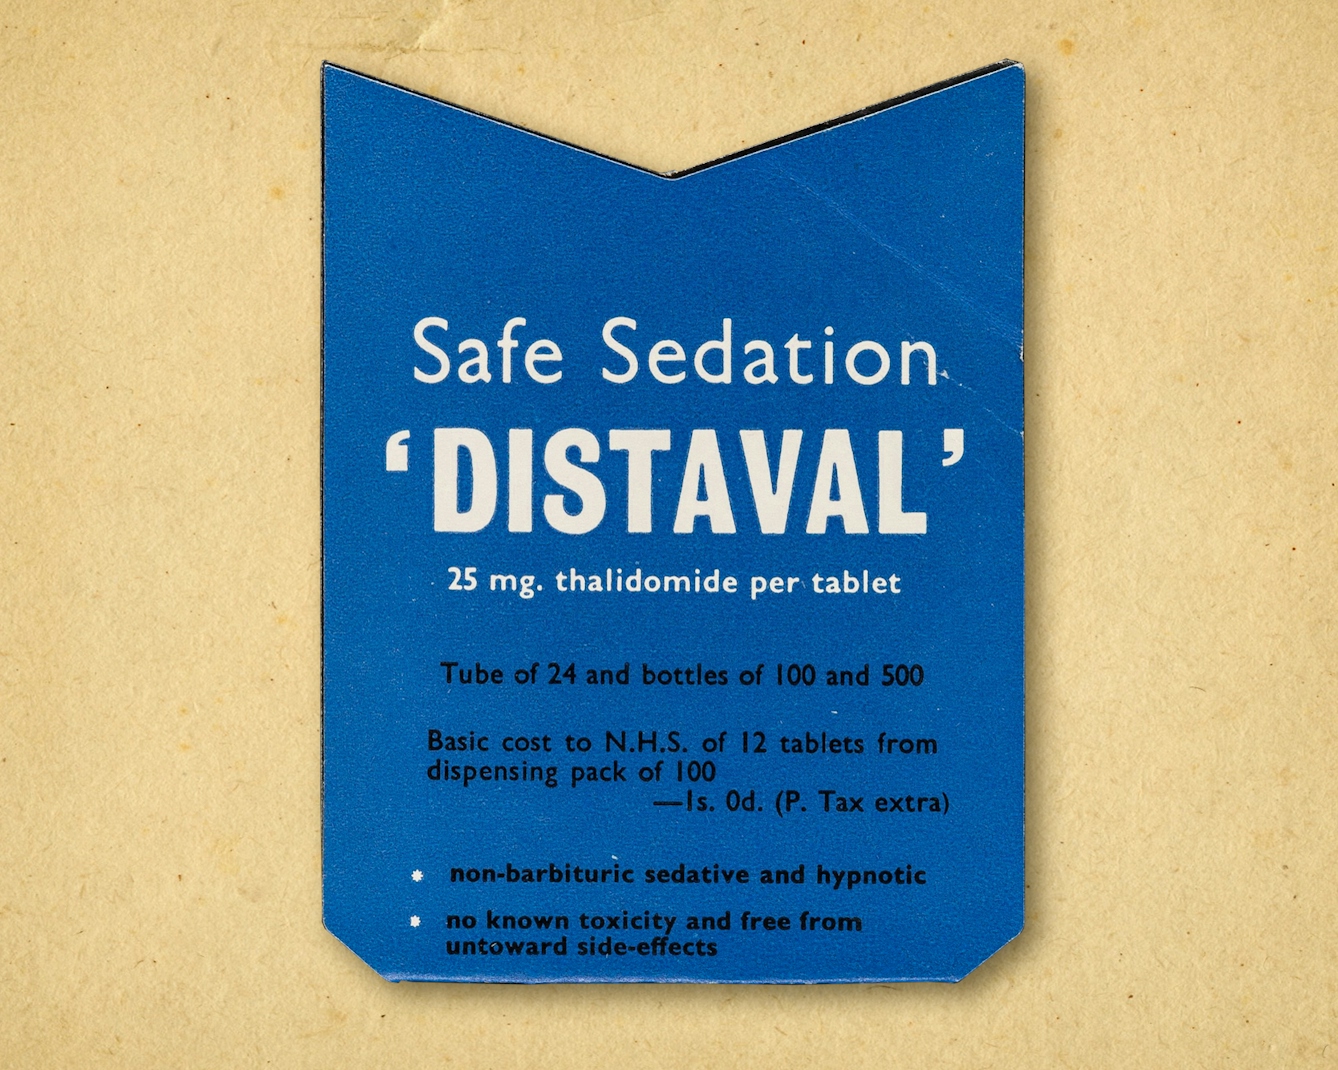 Photograph of a die-cut advertisement issued by The Distillers Company (Biochemicals) Limited for the sedatives Distaval and Distaval Forte, circa 1958, resting on a brown paper textured background. The advertisement is a rectangular blue shape with a 'v' cut out of the top. On the front in black and white text of varying sizes are the words, "Safe Sedation 'DISTAVAL' 25mg thalidomide per tablet. Tube of 24 and bottles of 100 and 500. Basic cost to NHS of 12 tablets from dispensing pack of 100 - 1s. 0d. (P. Tax extra). Non-barbituric sedative and hypnotic. No known toxicity and free from untoward side-effects."